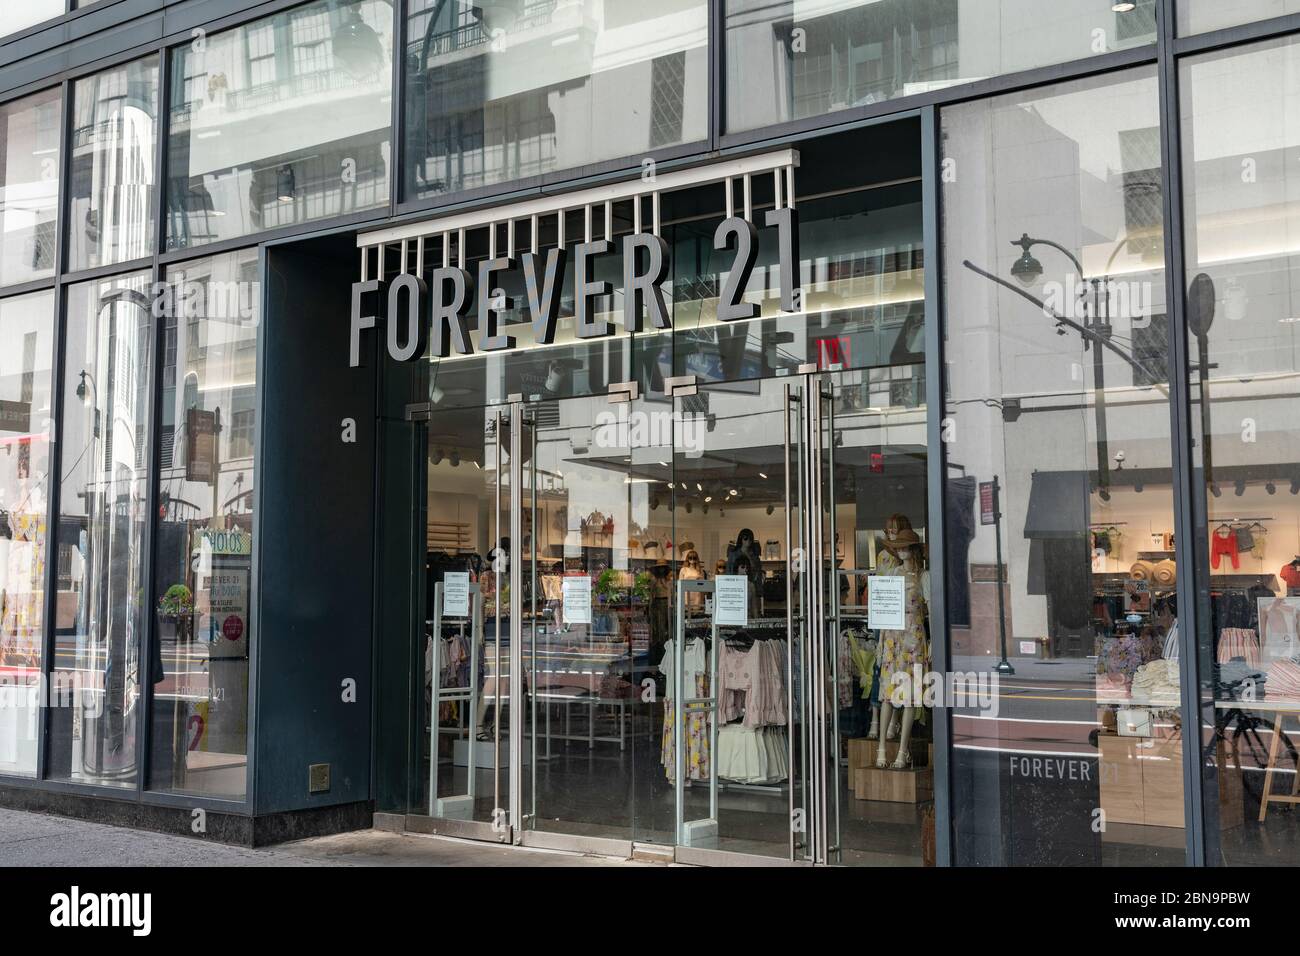 Forever 21 Files for Chapter 11 Bankruptcy Protection